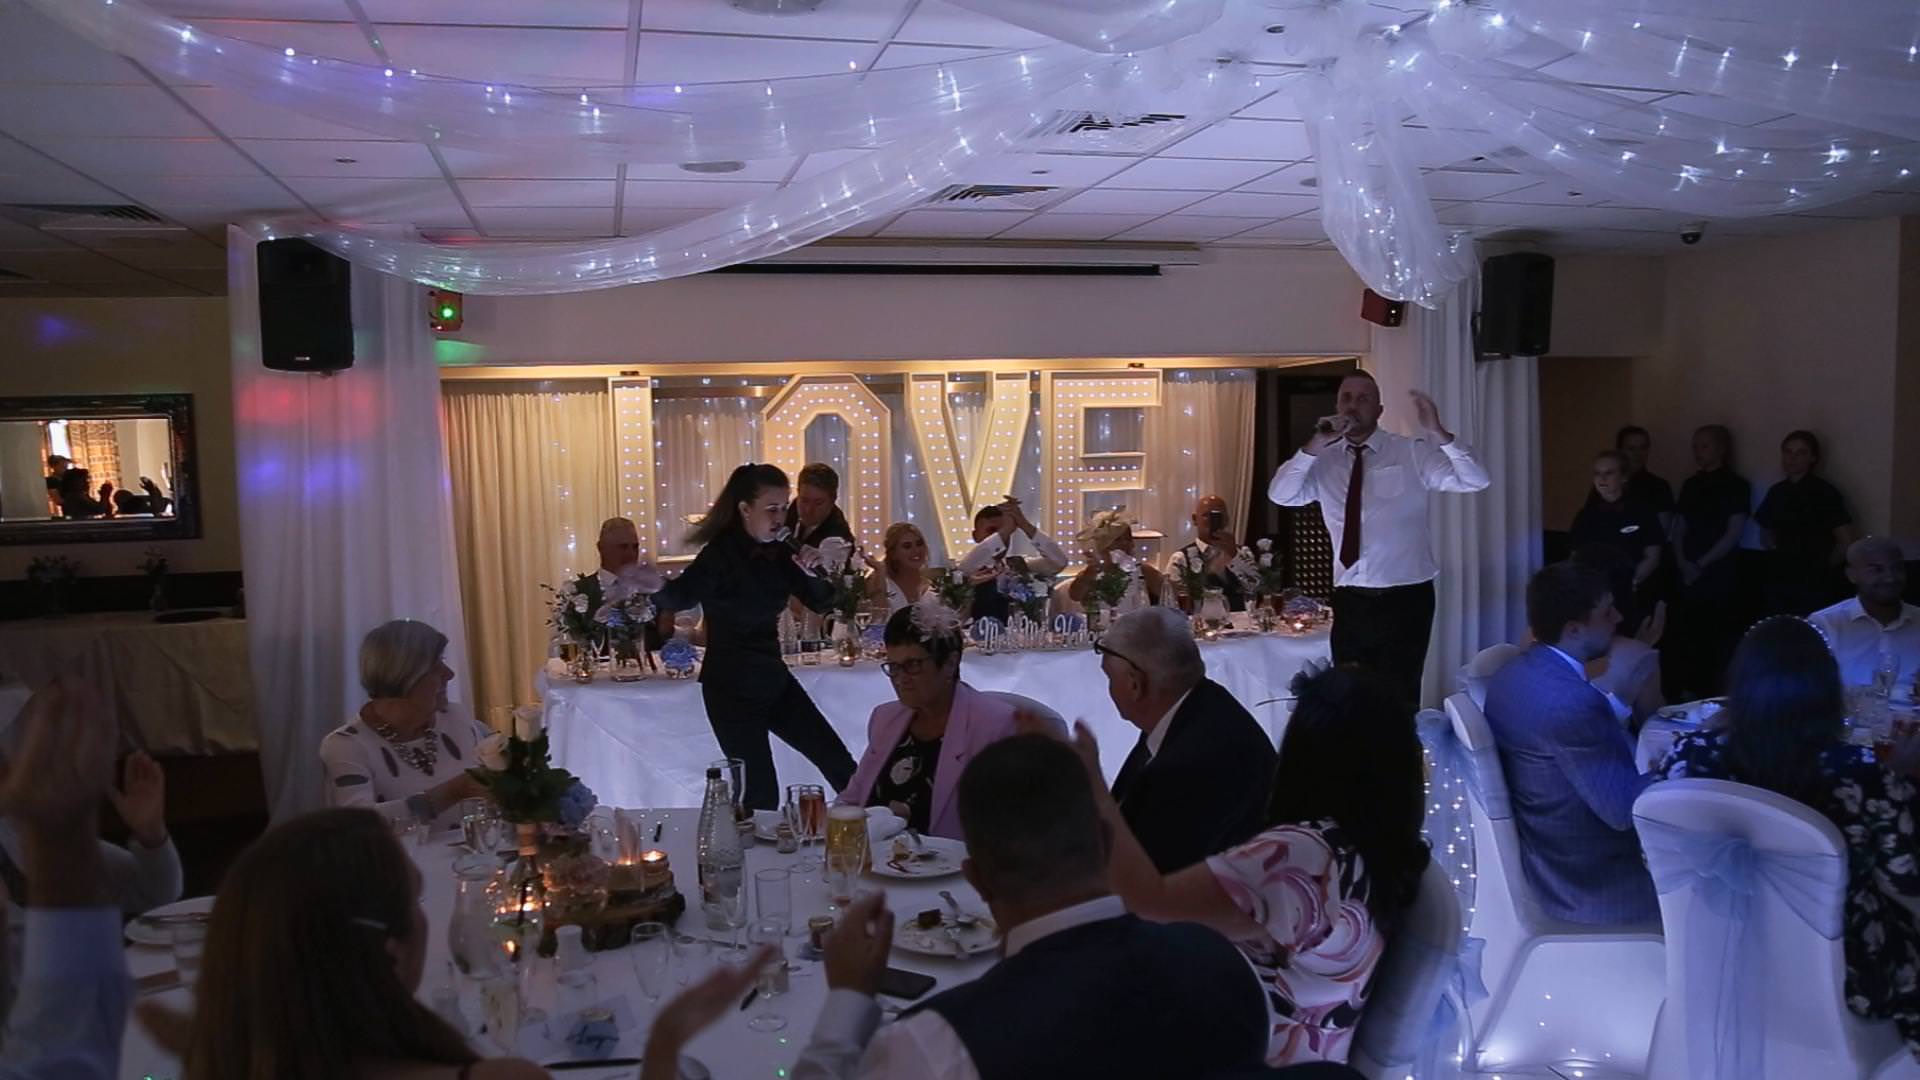 surprise shows perform at a wedding at Briars Hall in Lancashire